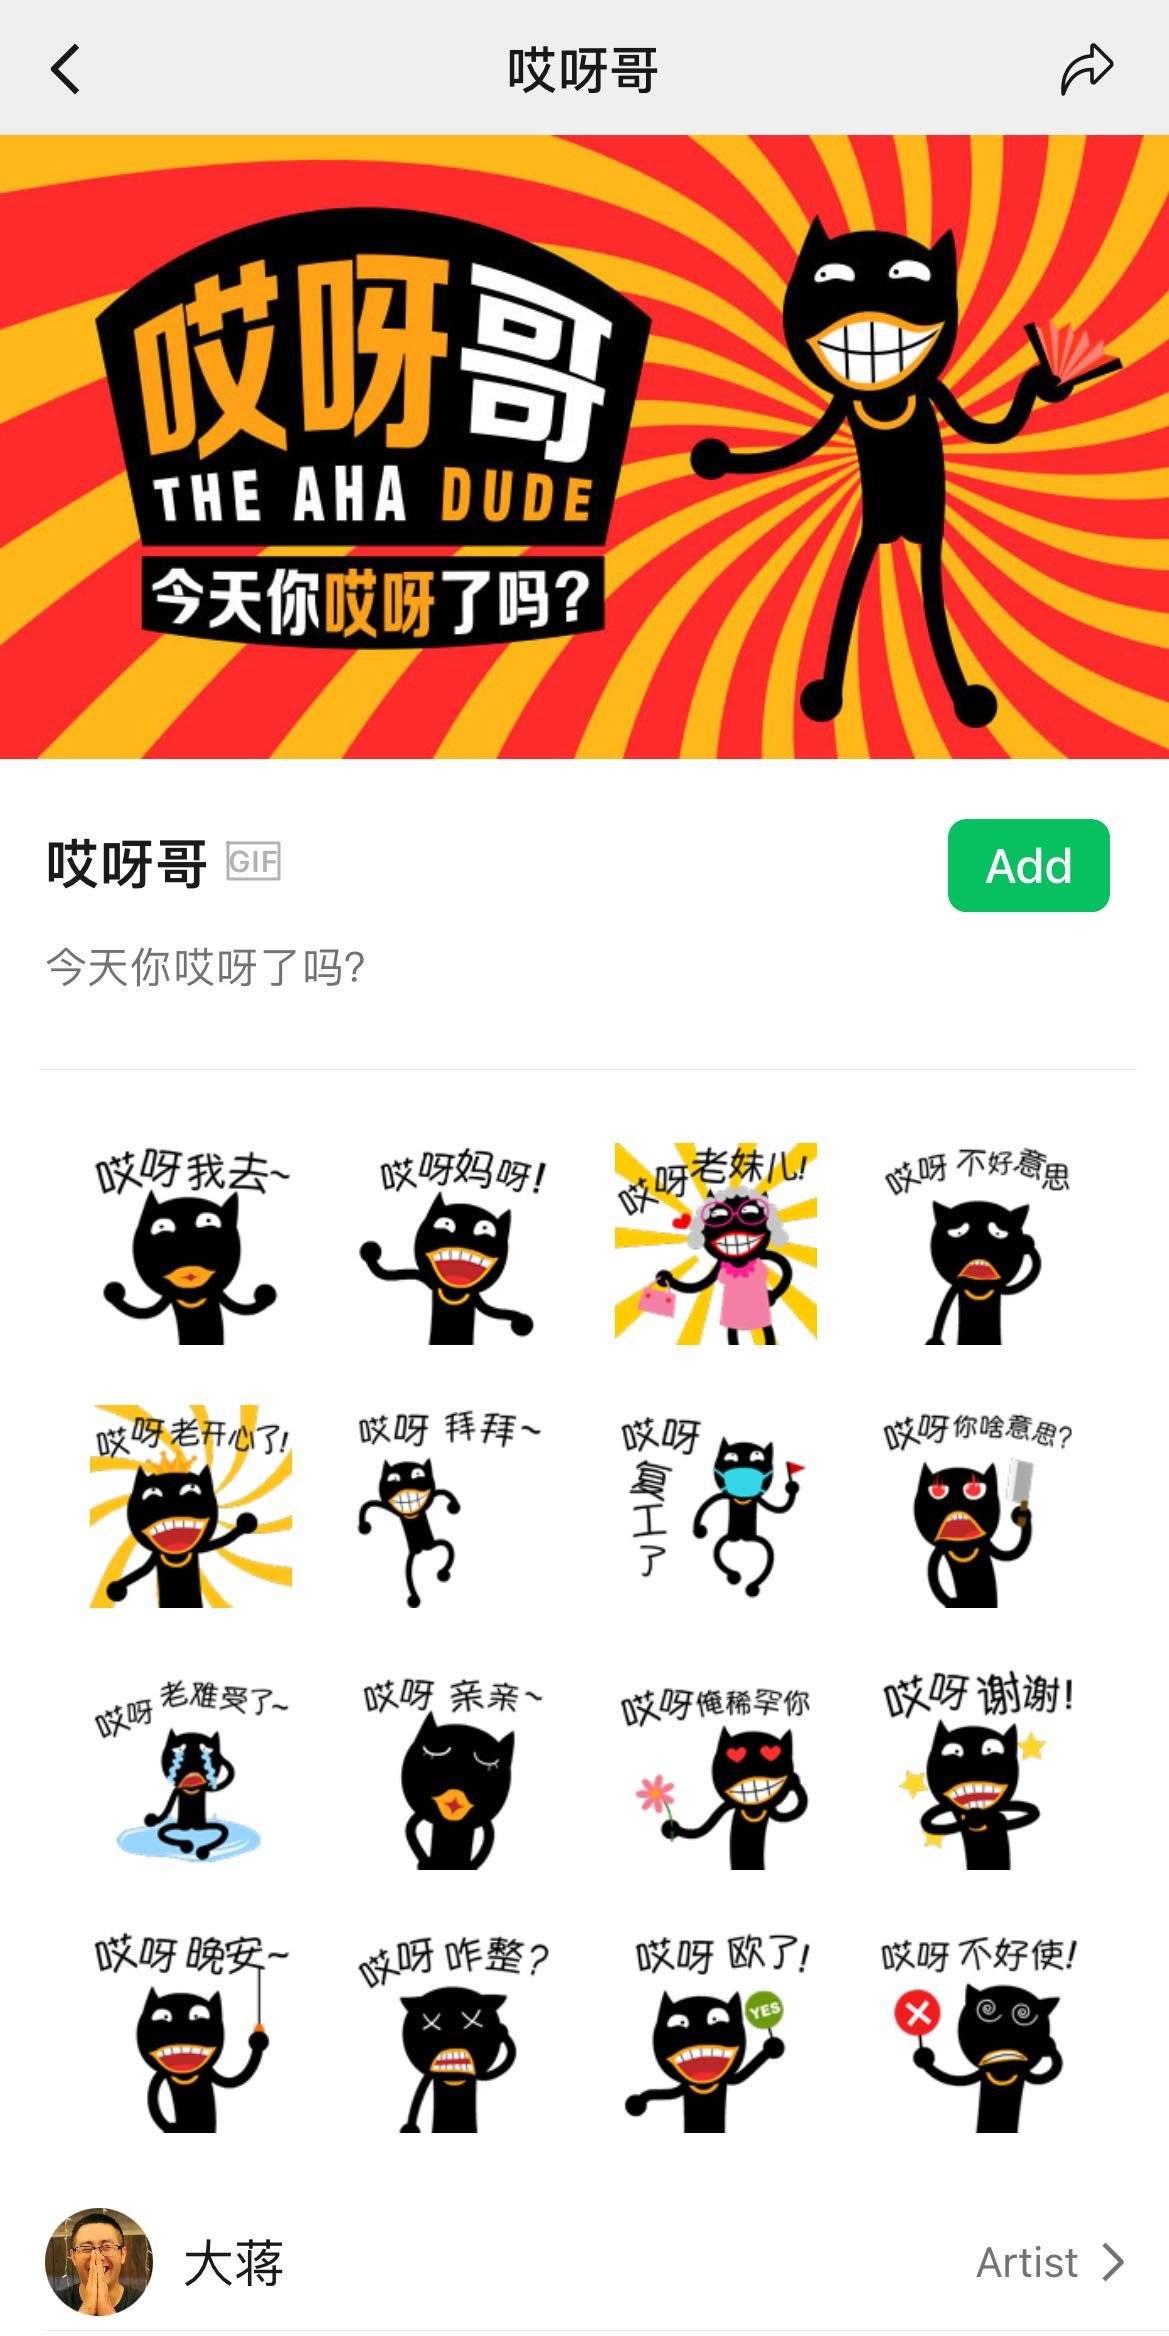 Dajiang: The full array of his 哎呀哥 [Āiyāgē] WeChat sticker collection.